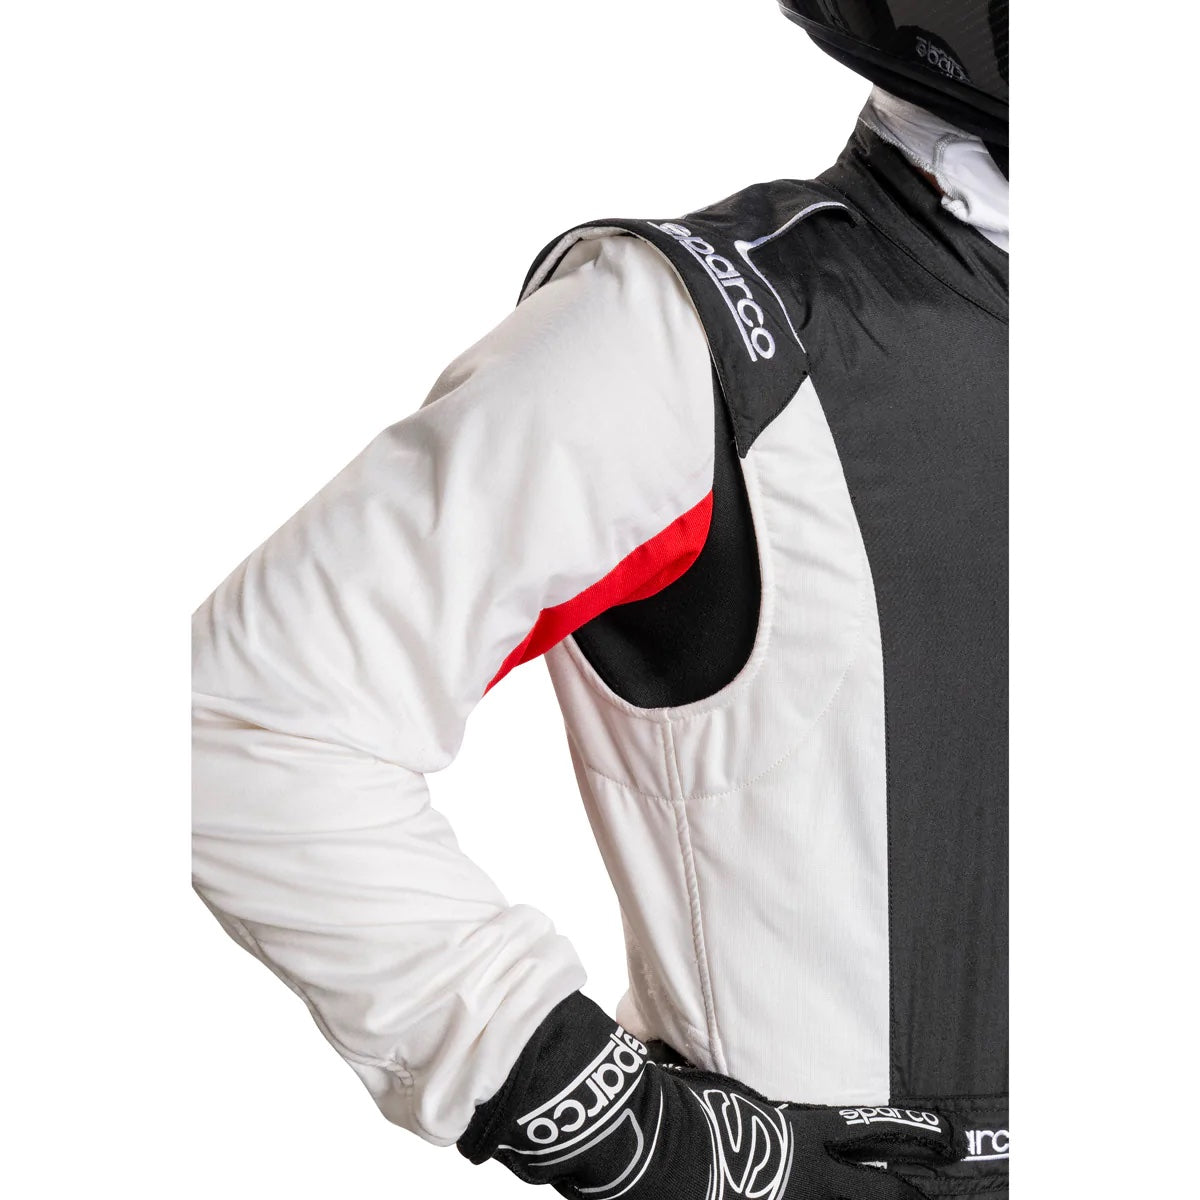 Sparco Competition USA Racing Suit Arm image